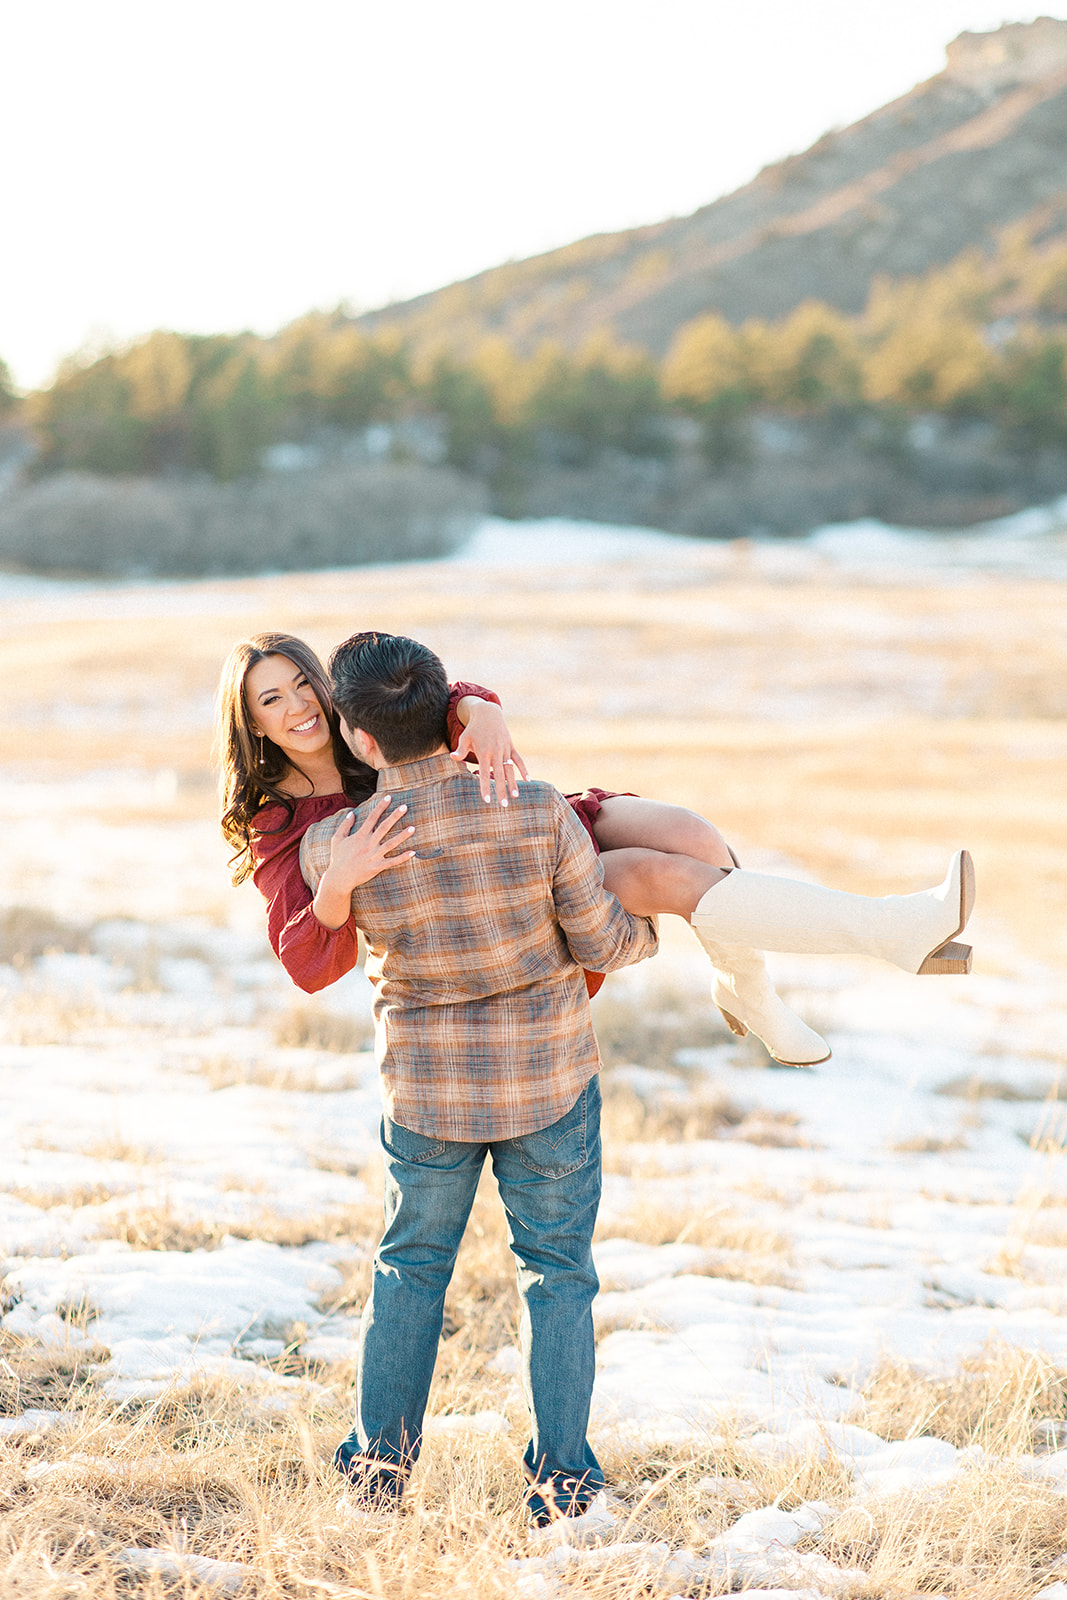 Groom picking bride up in engagement portrait in mountain setting